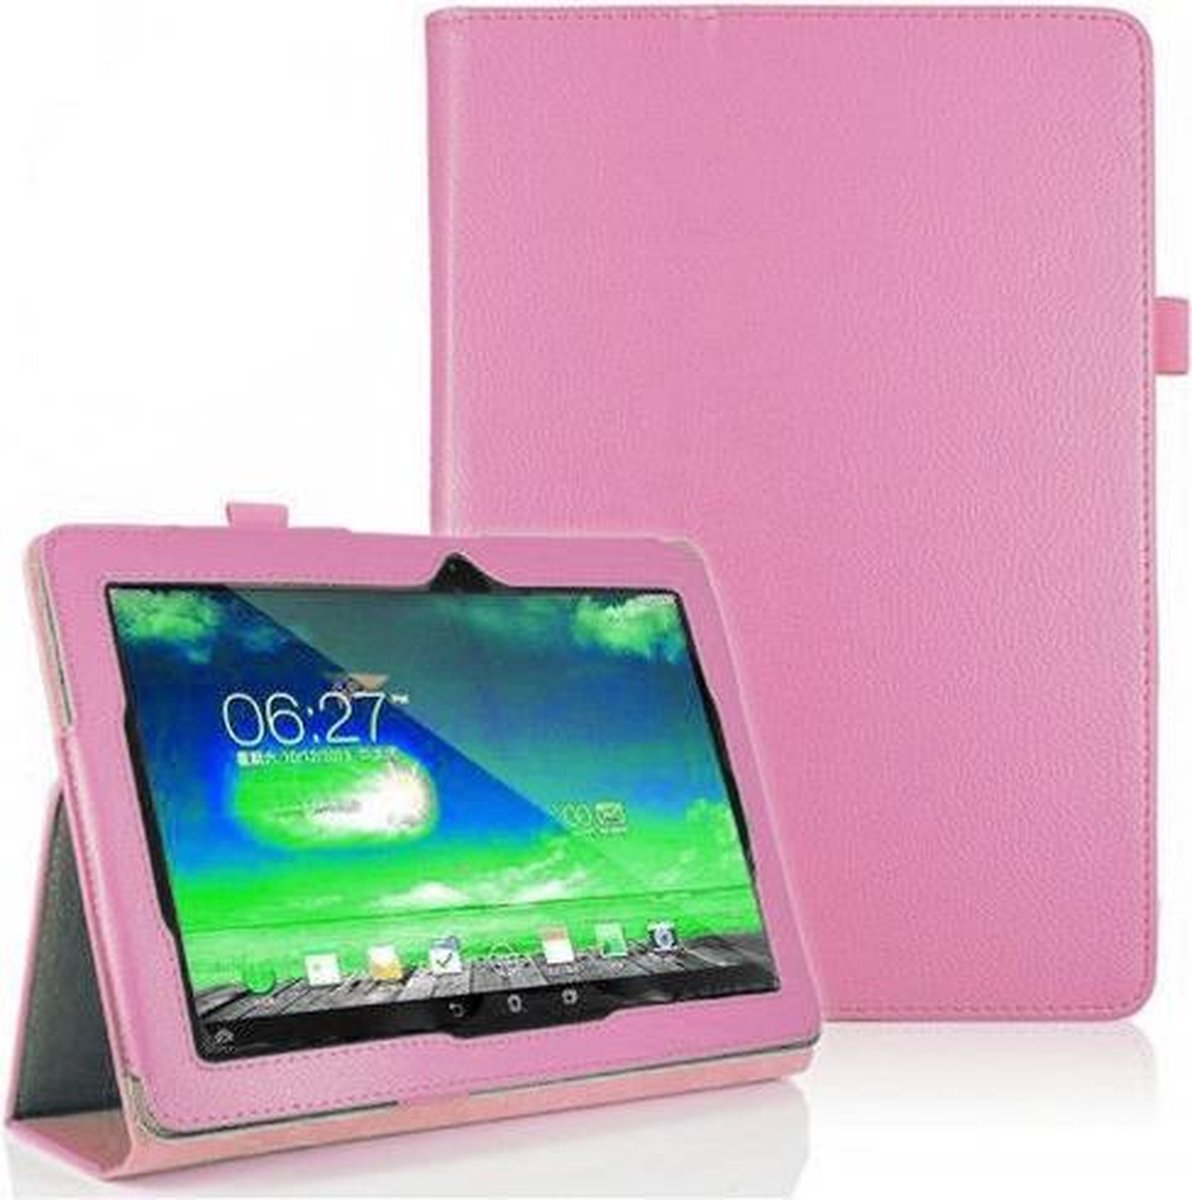 Asus Memo Pad 10 ME102A Leather Stand Case Roze Pink